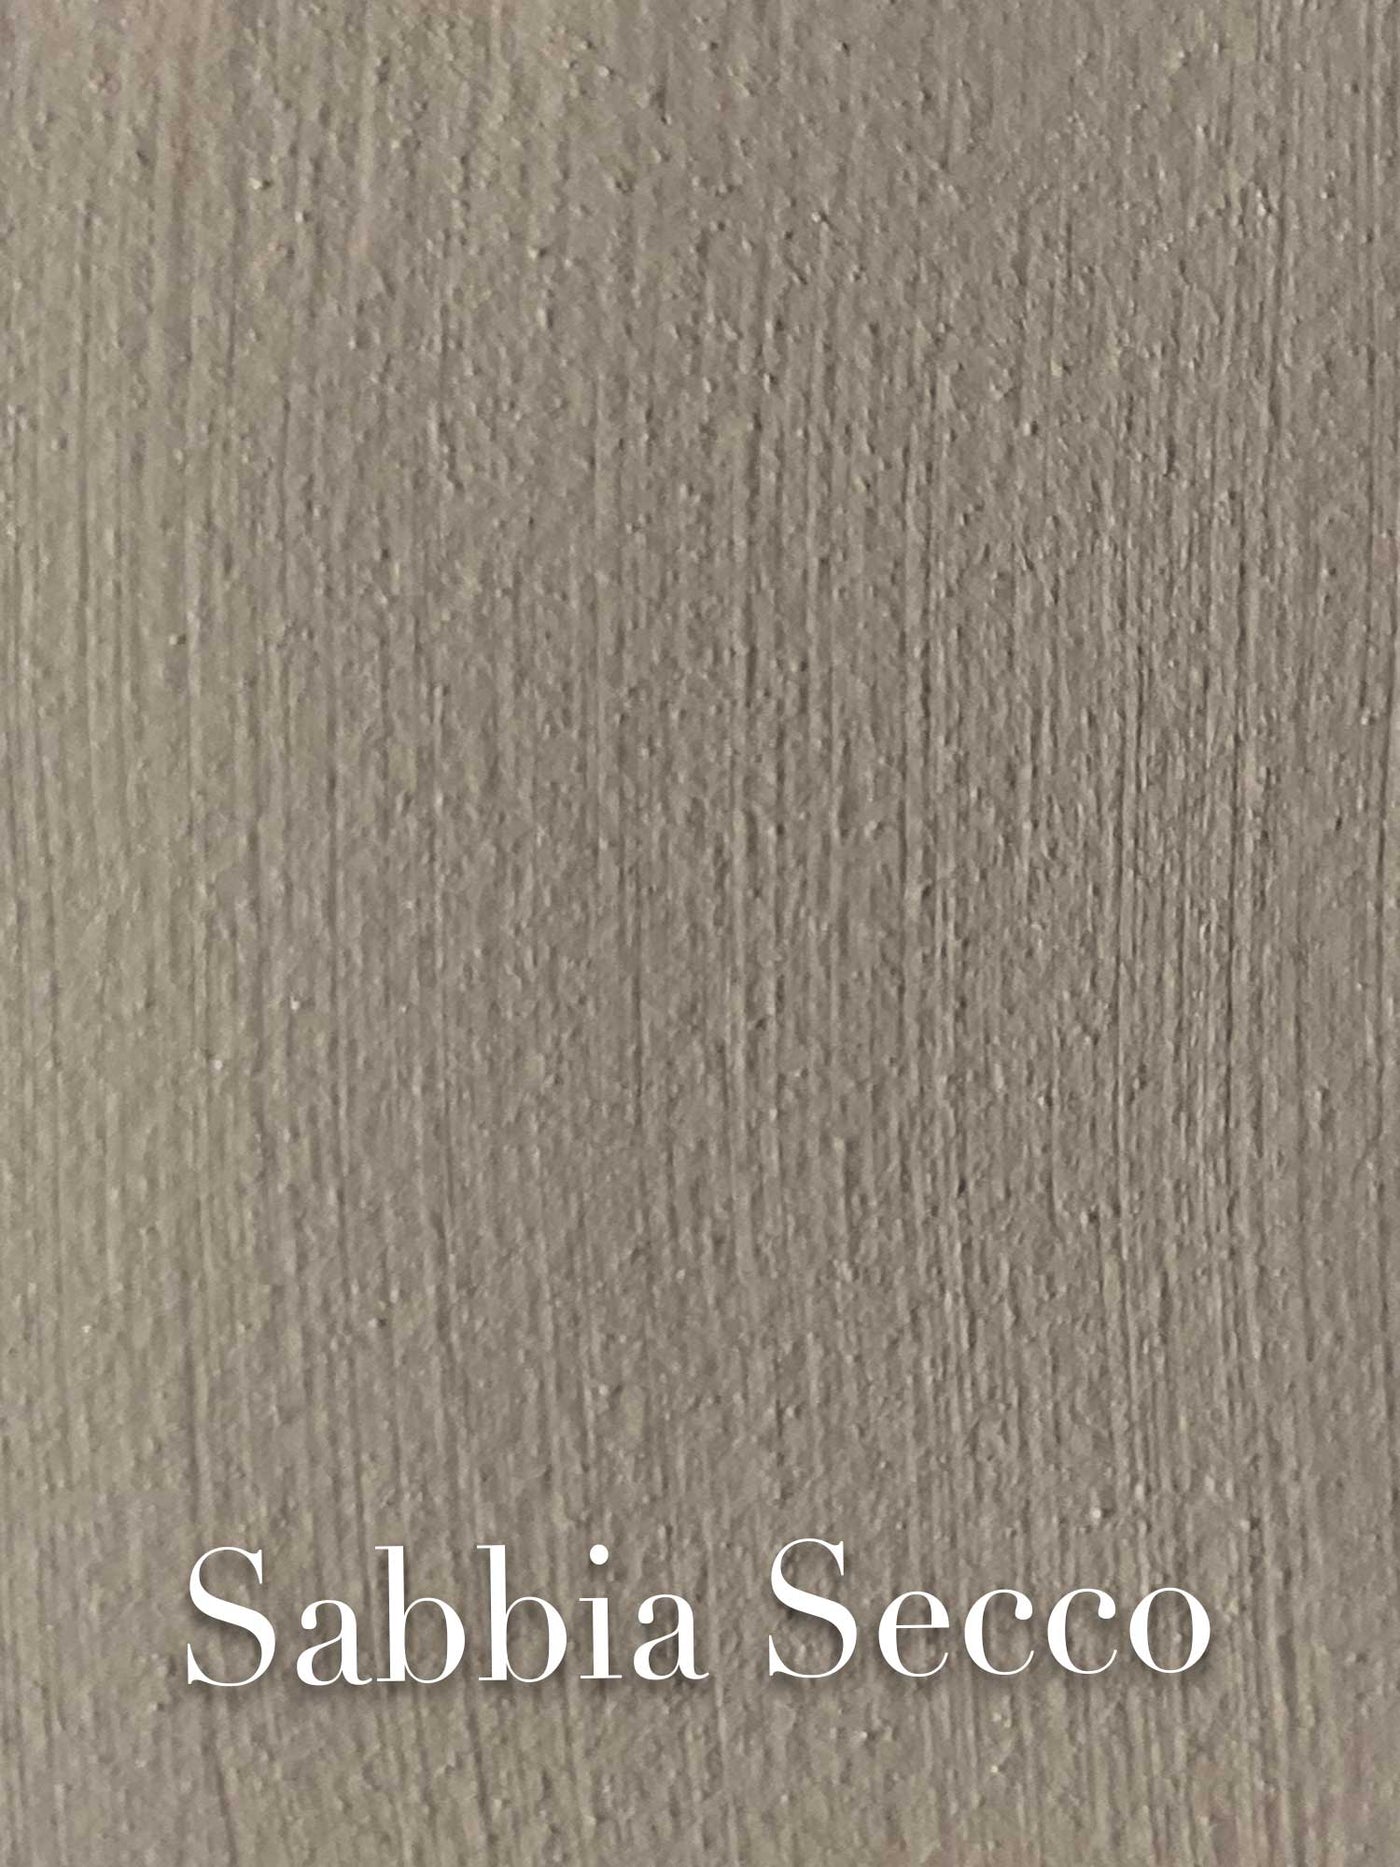 Sabbia secco - Old Packaging